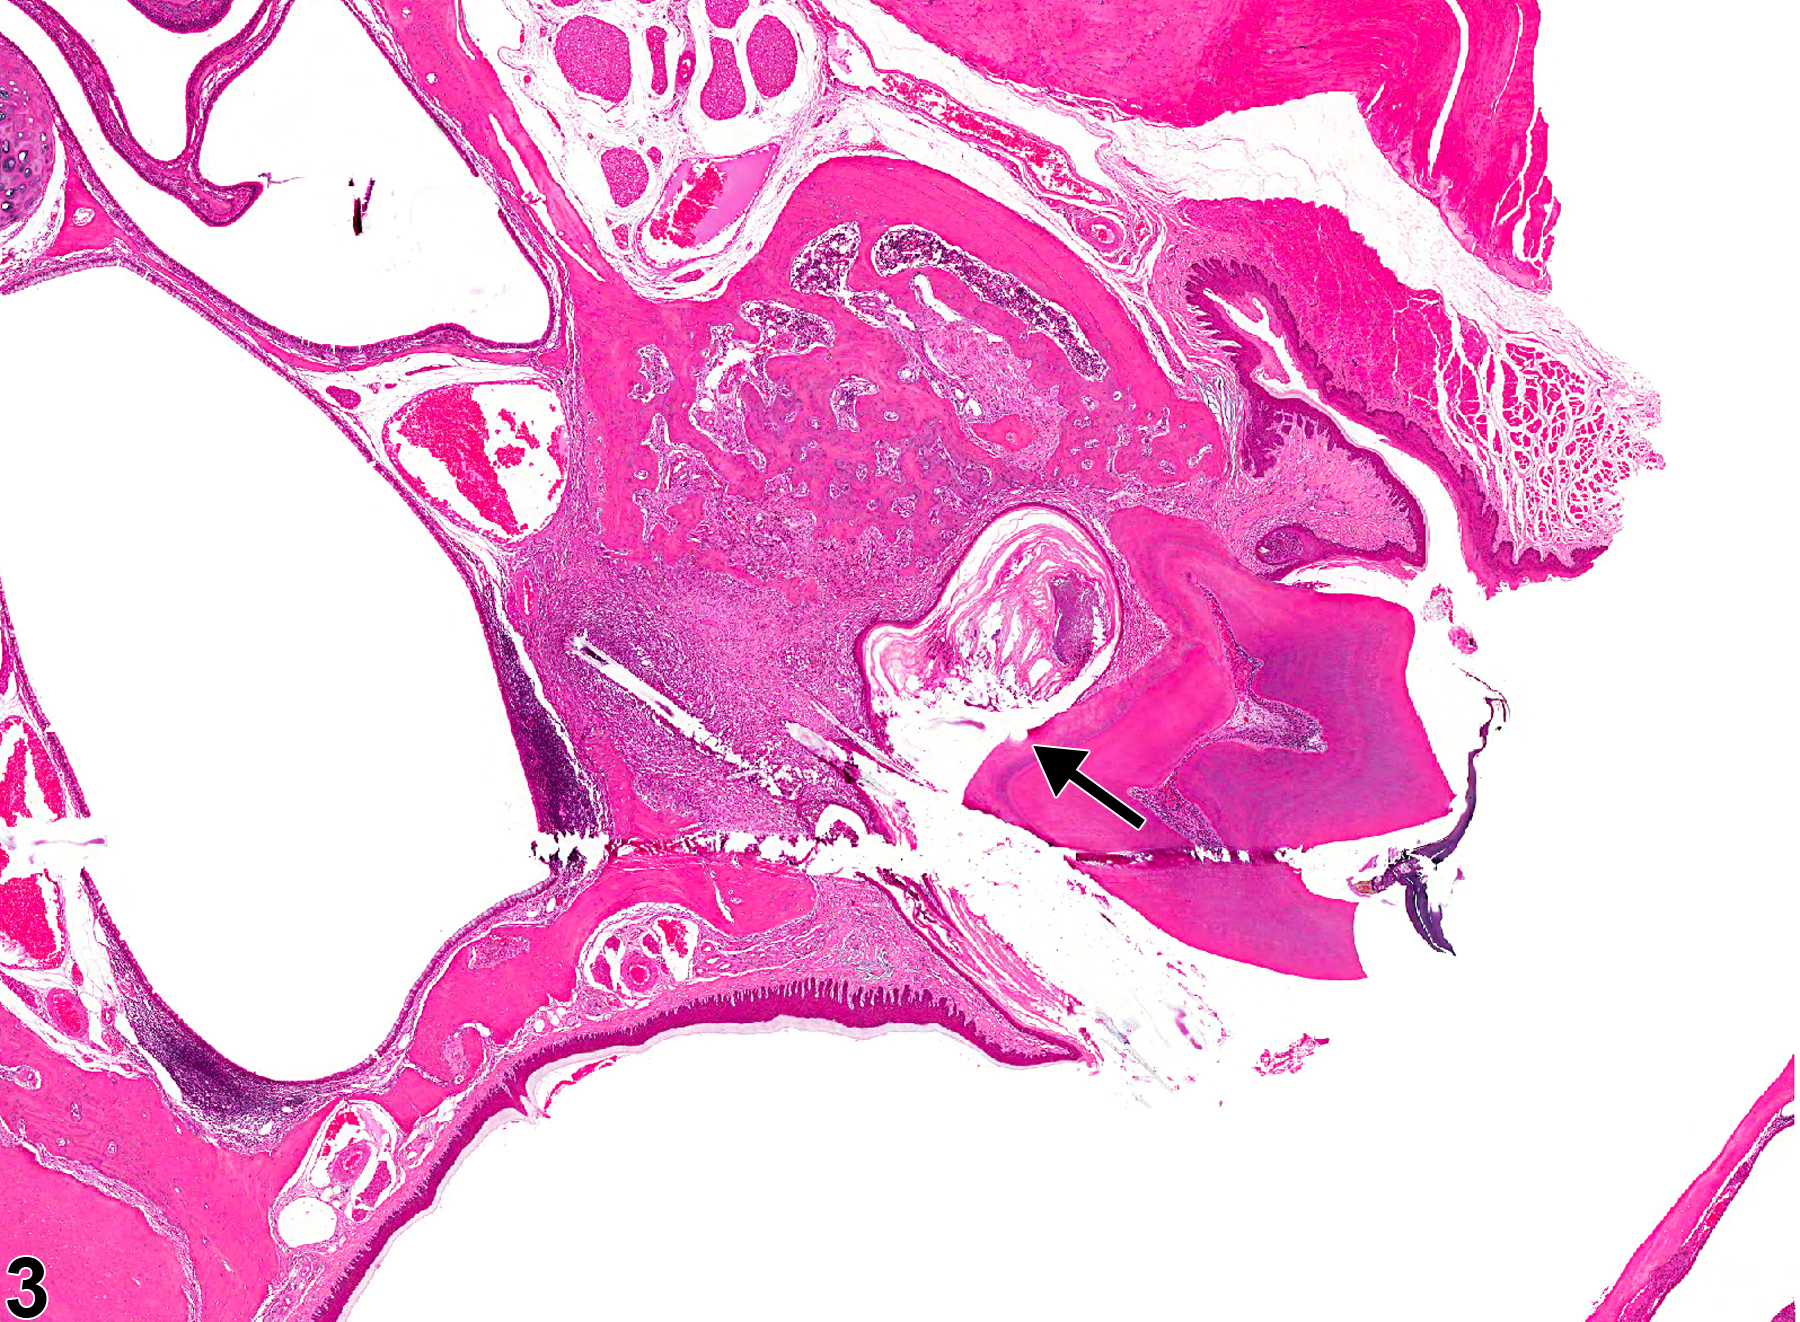 Image of periodontal pocket in the tooth from a male F344/N rat in a chronic study